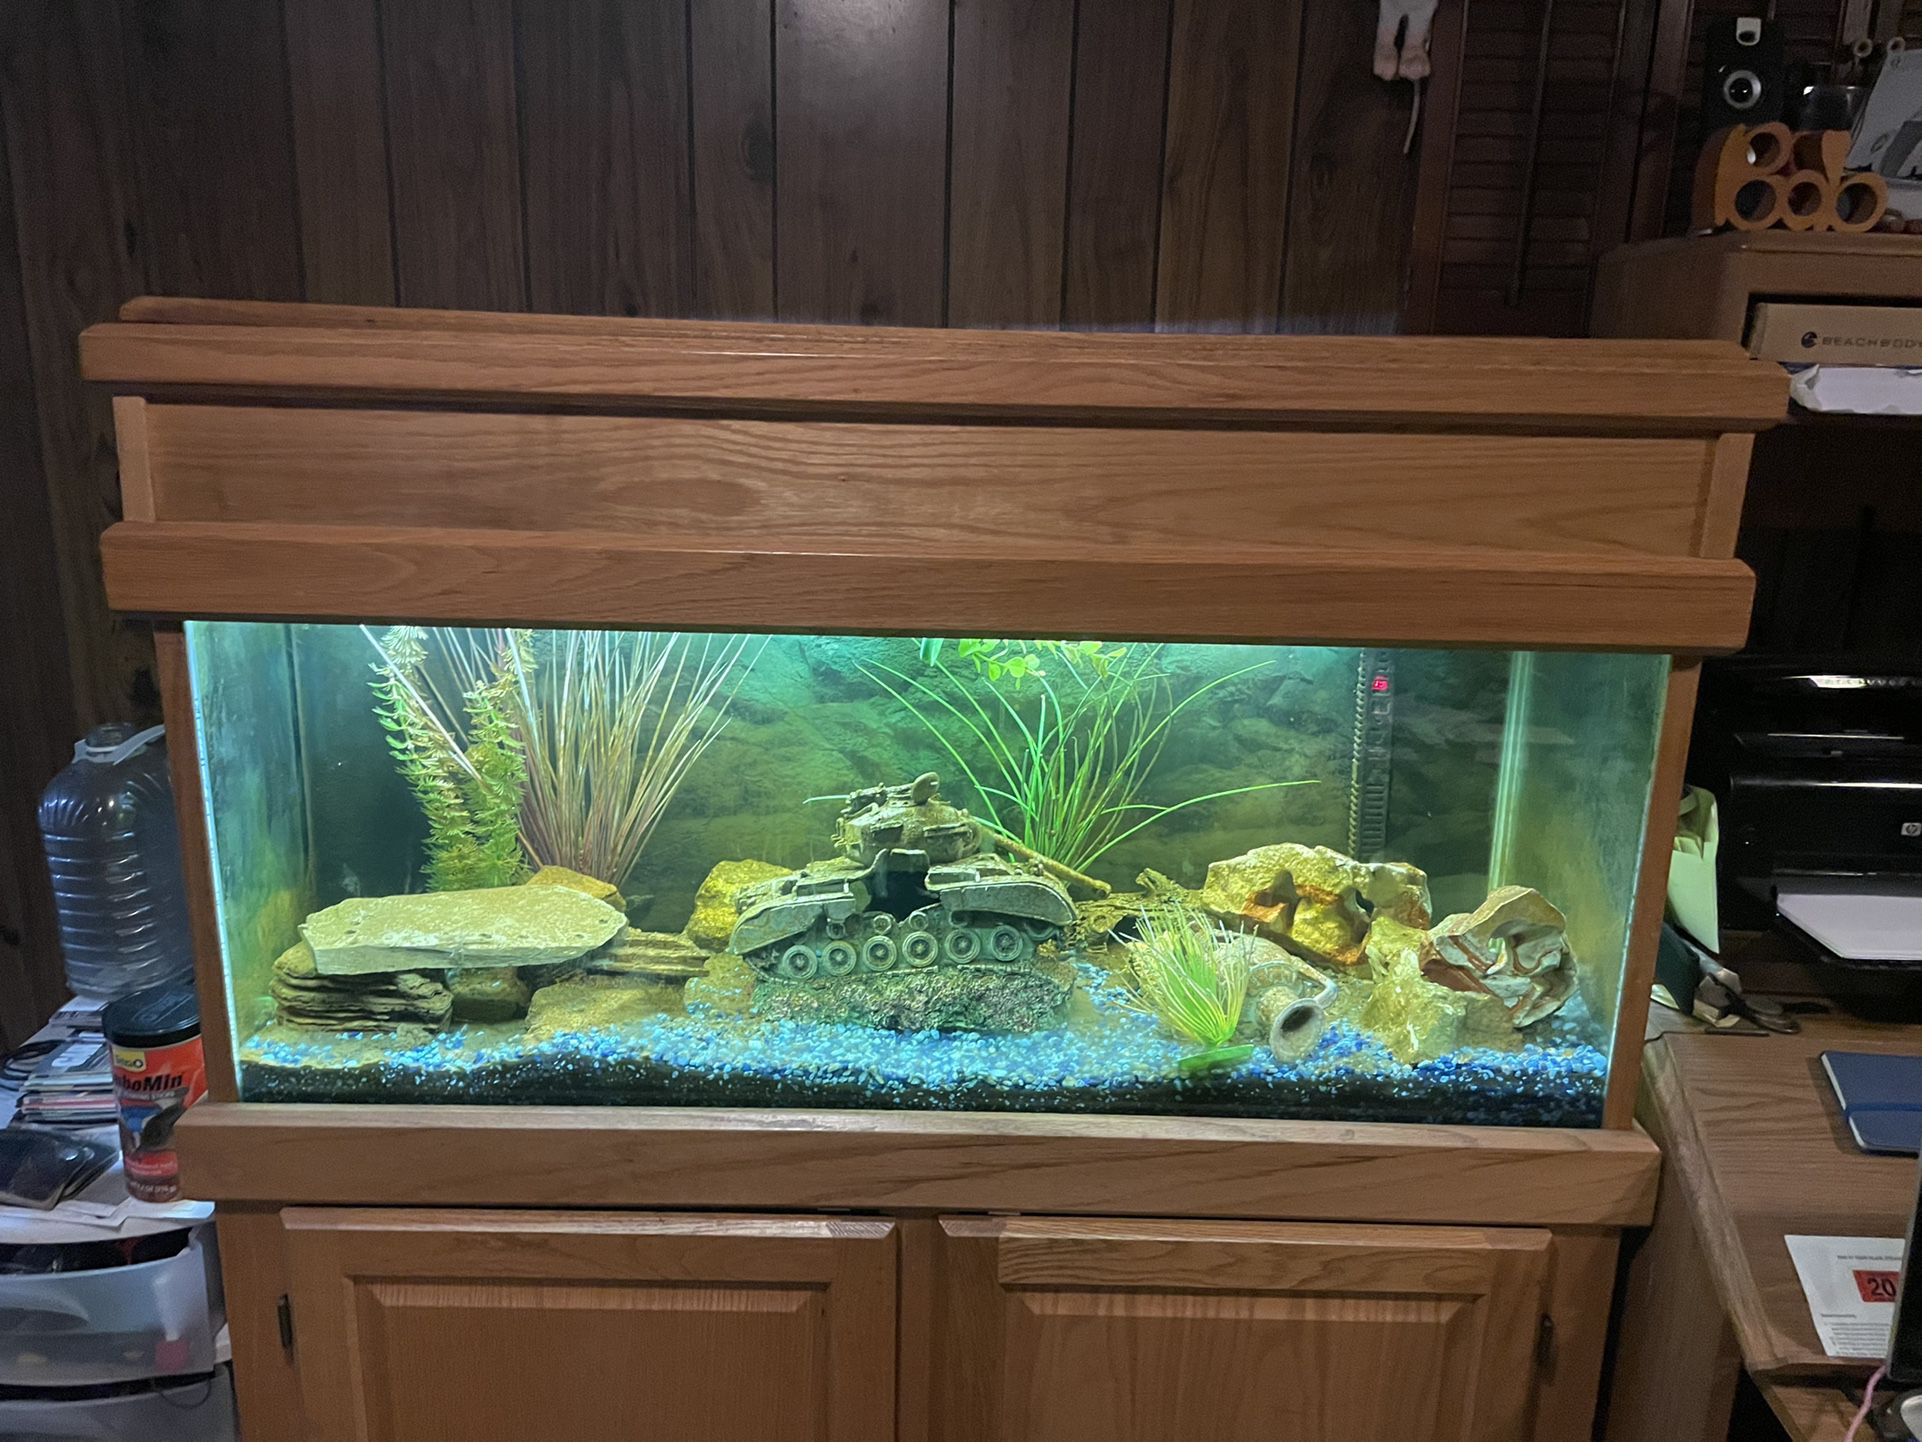 90 Gallon Glass Fish Tank With Oak Top And Oak Base For Sale In Queens, Ny  - Offerup